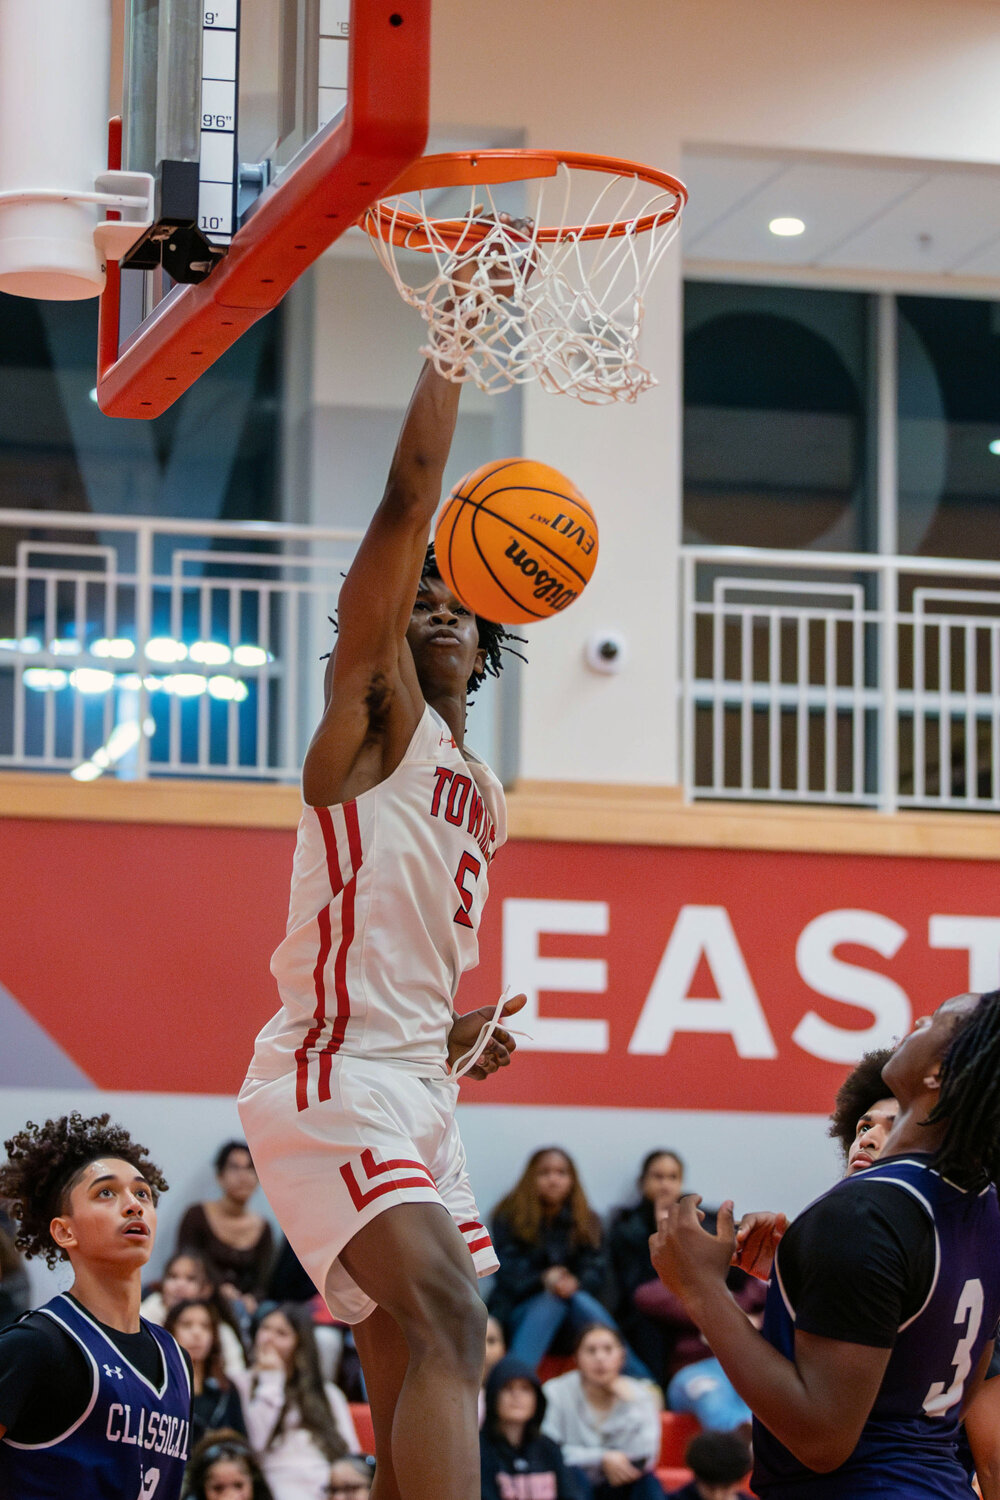 Kenaz Ochgwu dunks during a recent East Providence High School boys' basketball game. Ochgwu and the Townies earned an important road win February 8, rallying from double digits down to defeat host Narragansett.